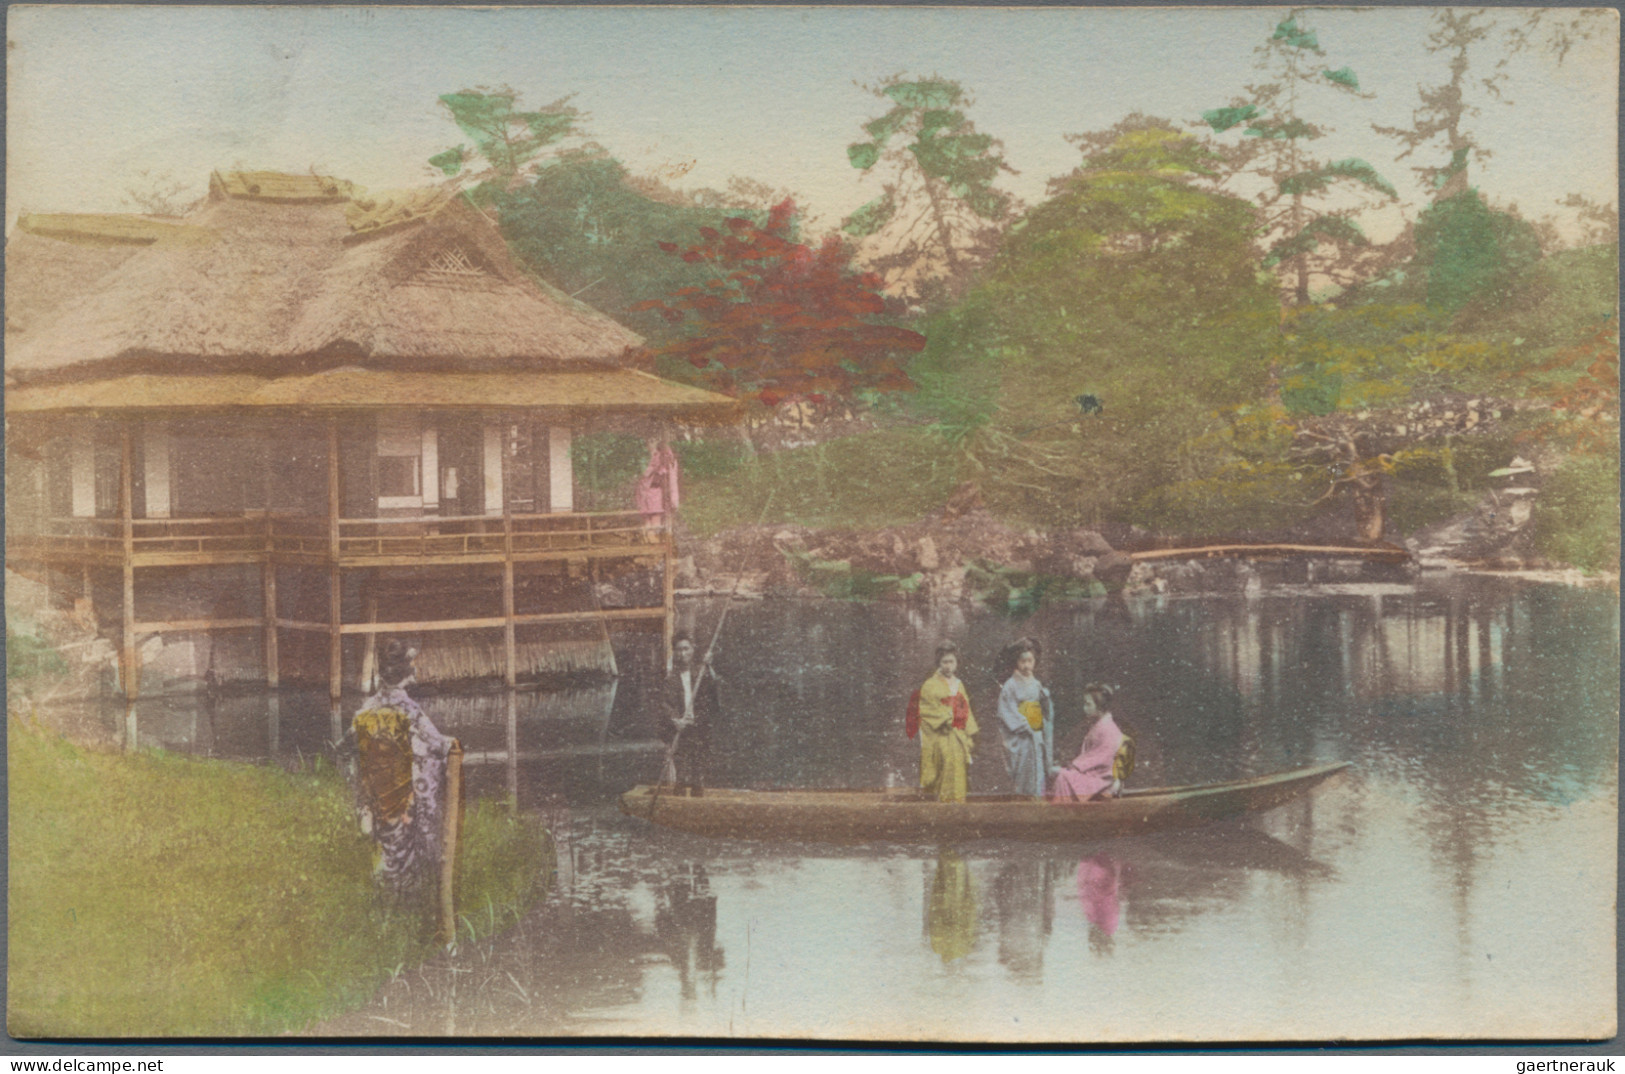 Japan - specialities: 1900/1930 (ca.), "Geisha", ca. 27 picture post cards, most